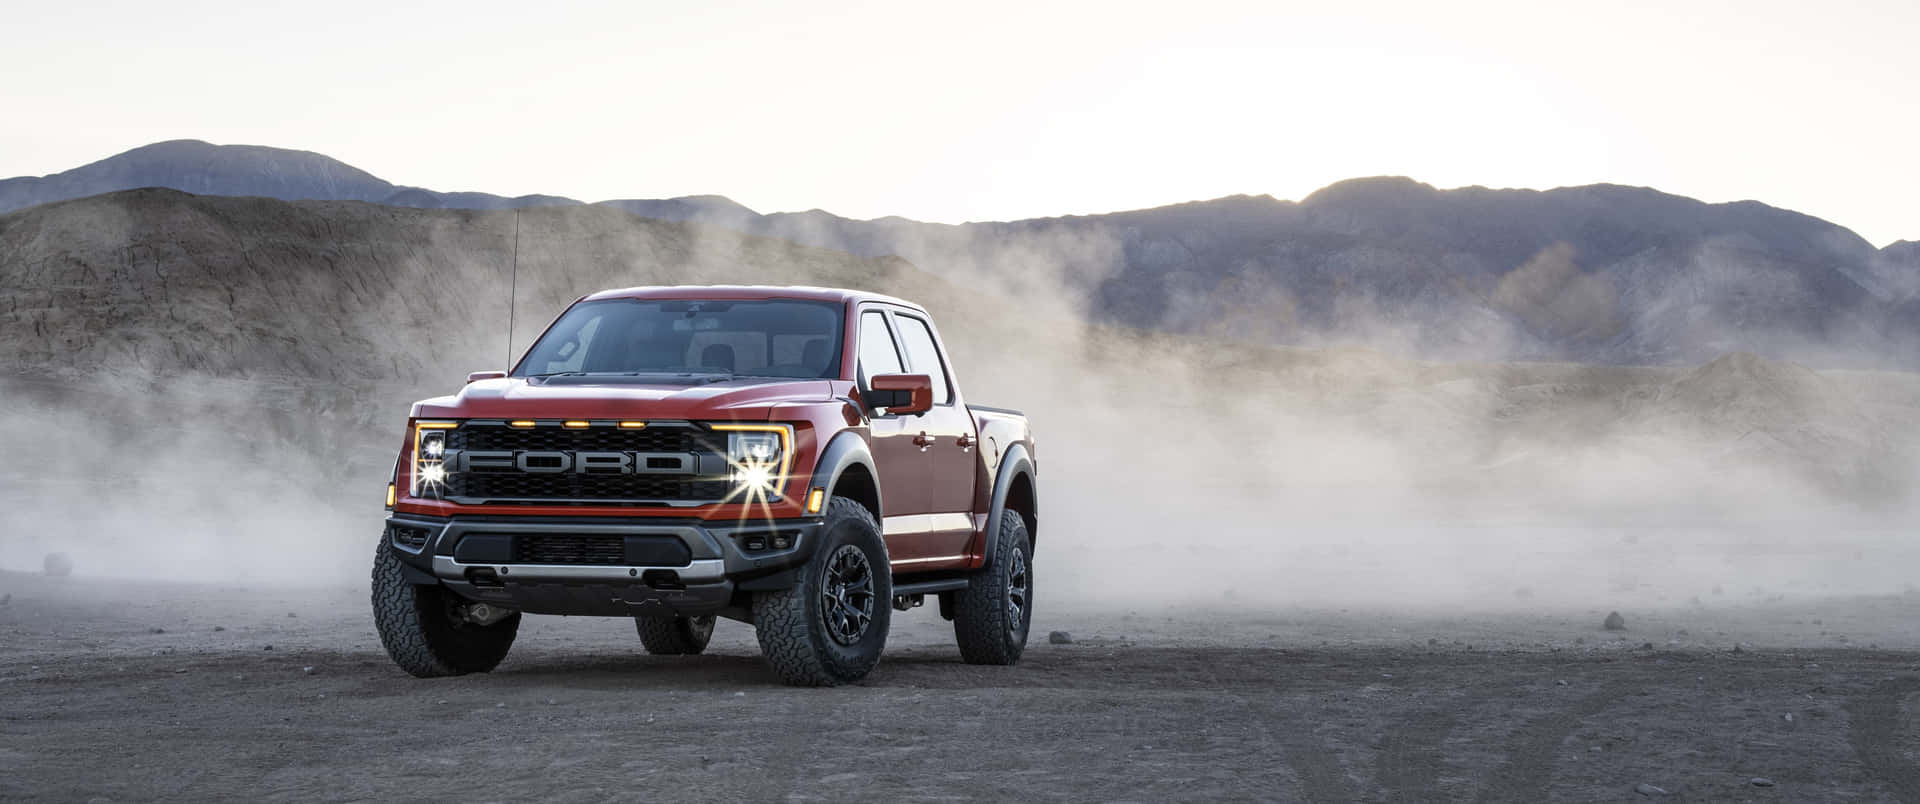 The 2020 Ford F-150 Raptor Is Driving Through The Desert Background